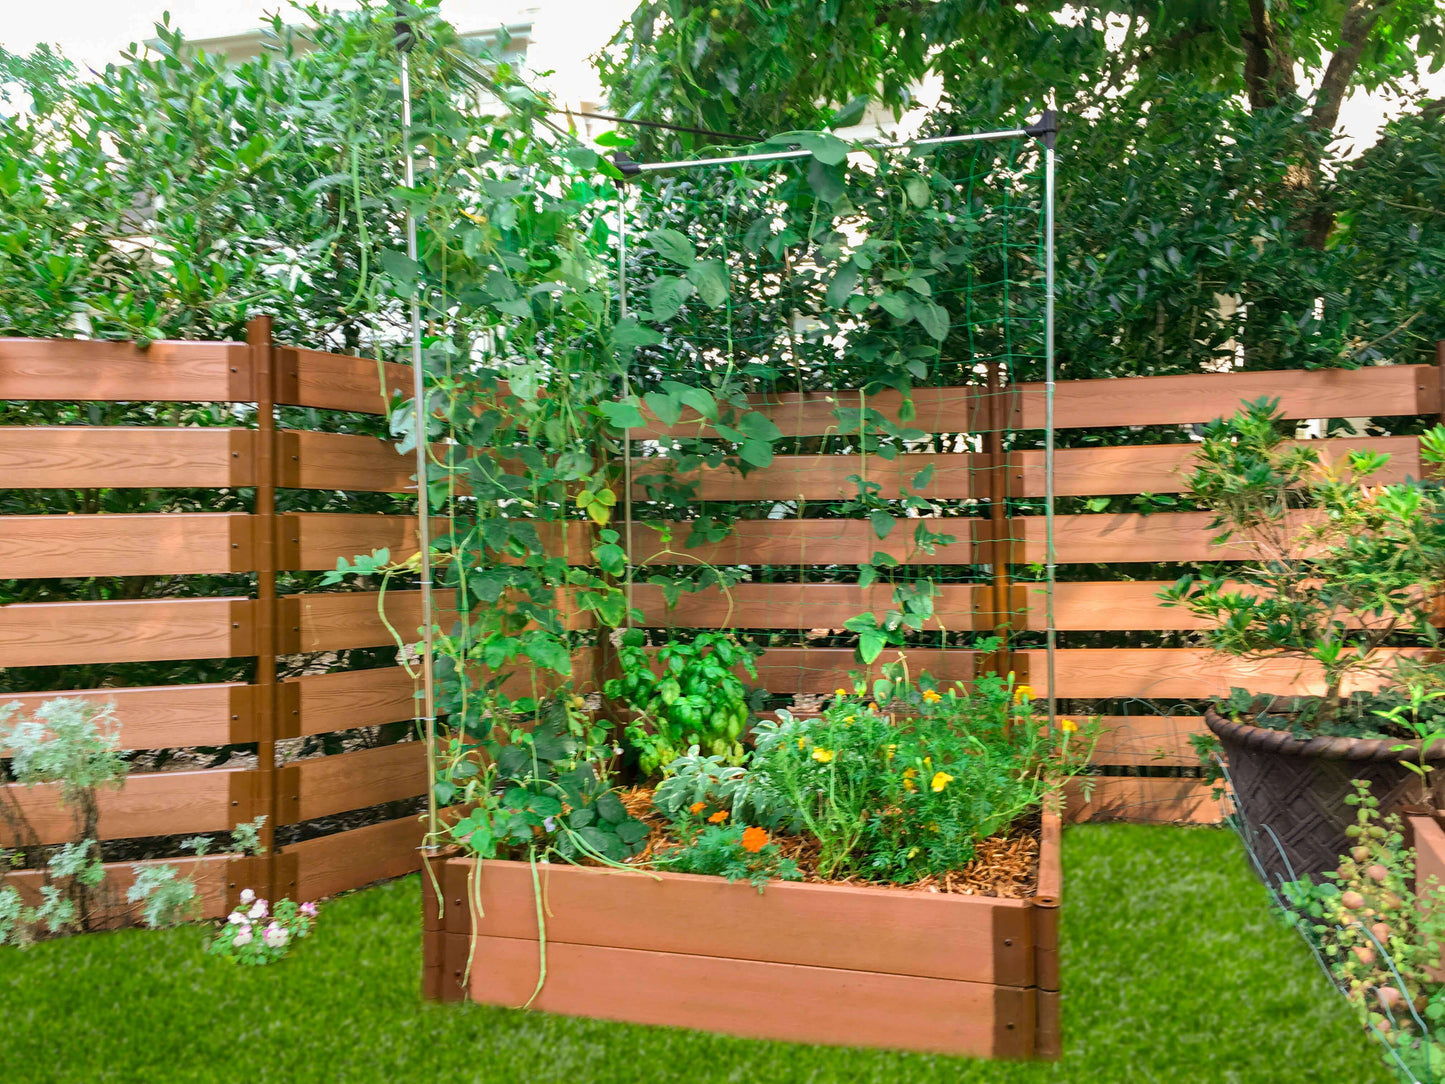 4' x 4' Raised Garden Bed with Trellis Raised Garden Beds Frame It All Classic Sienna 1" 2 = 11"